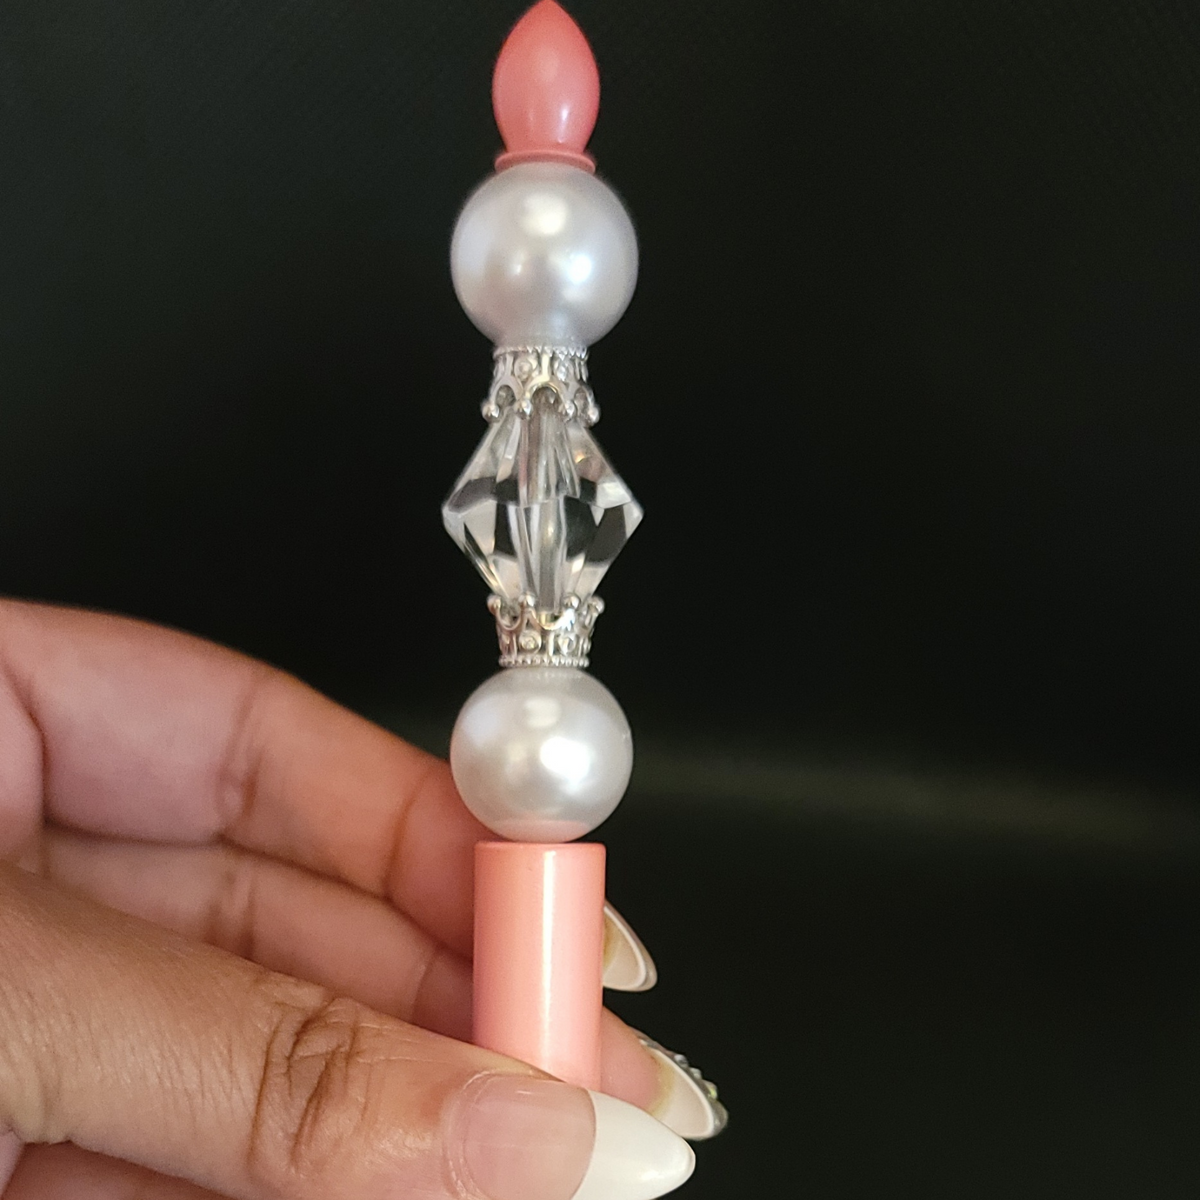 Stunning Victorian Blister Pearl, Rhinestones, and Sterling Silver Pen